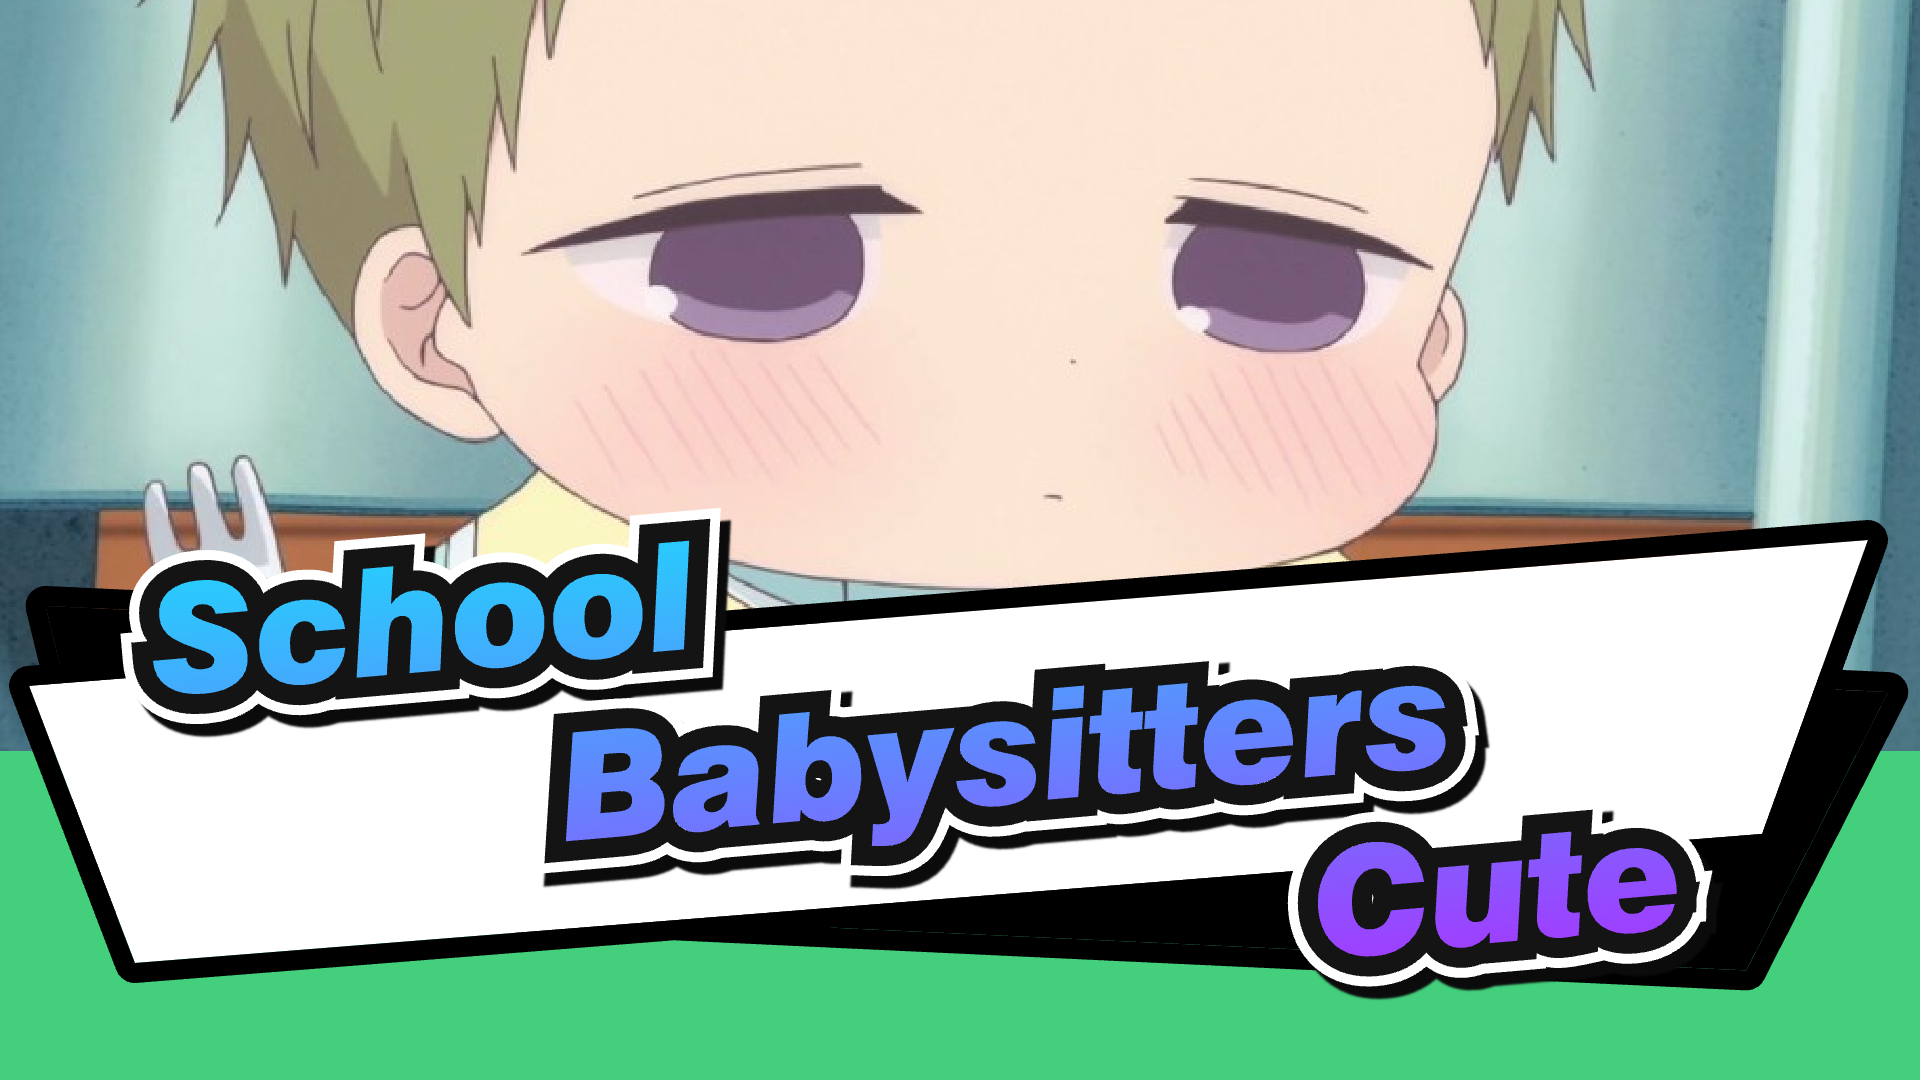 School Babysitters - Sugar Bomb! - I drink and watch anime